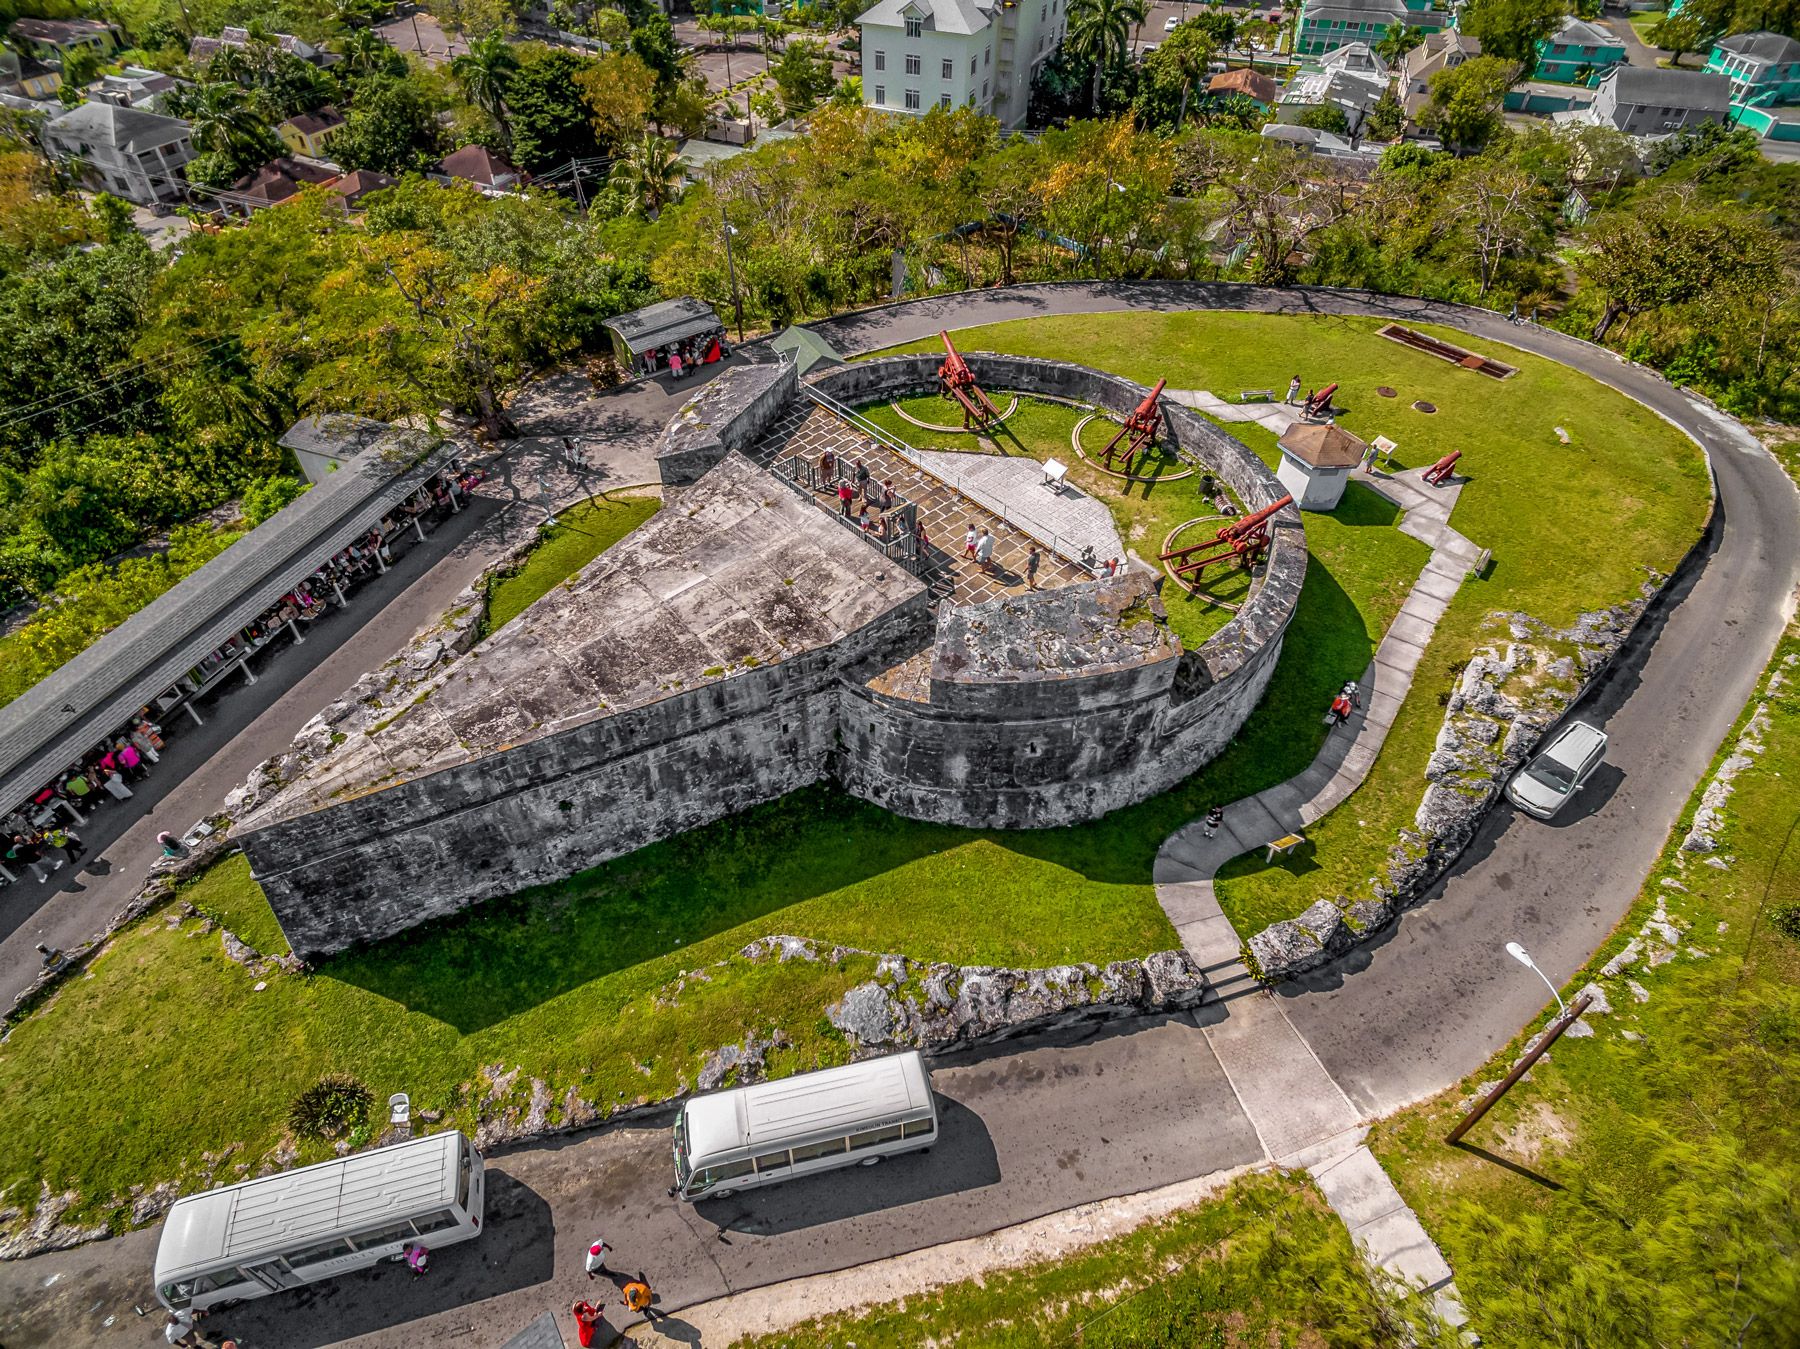 Explore These Incredible Forts Of Nassau For A Dose Of Bahamian History!